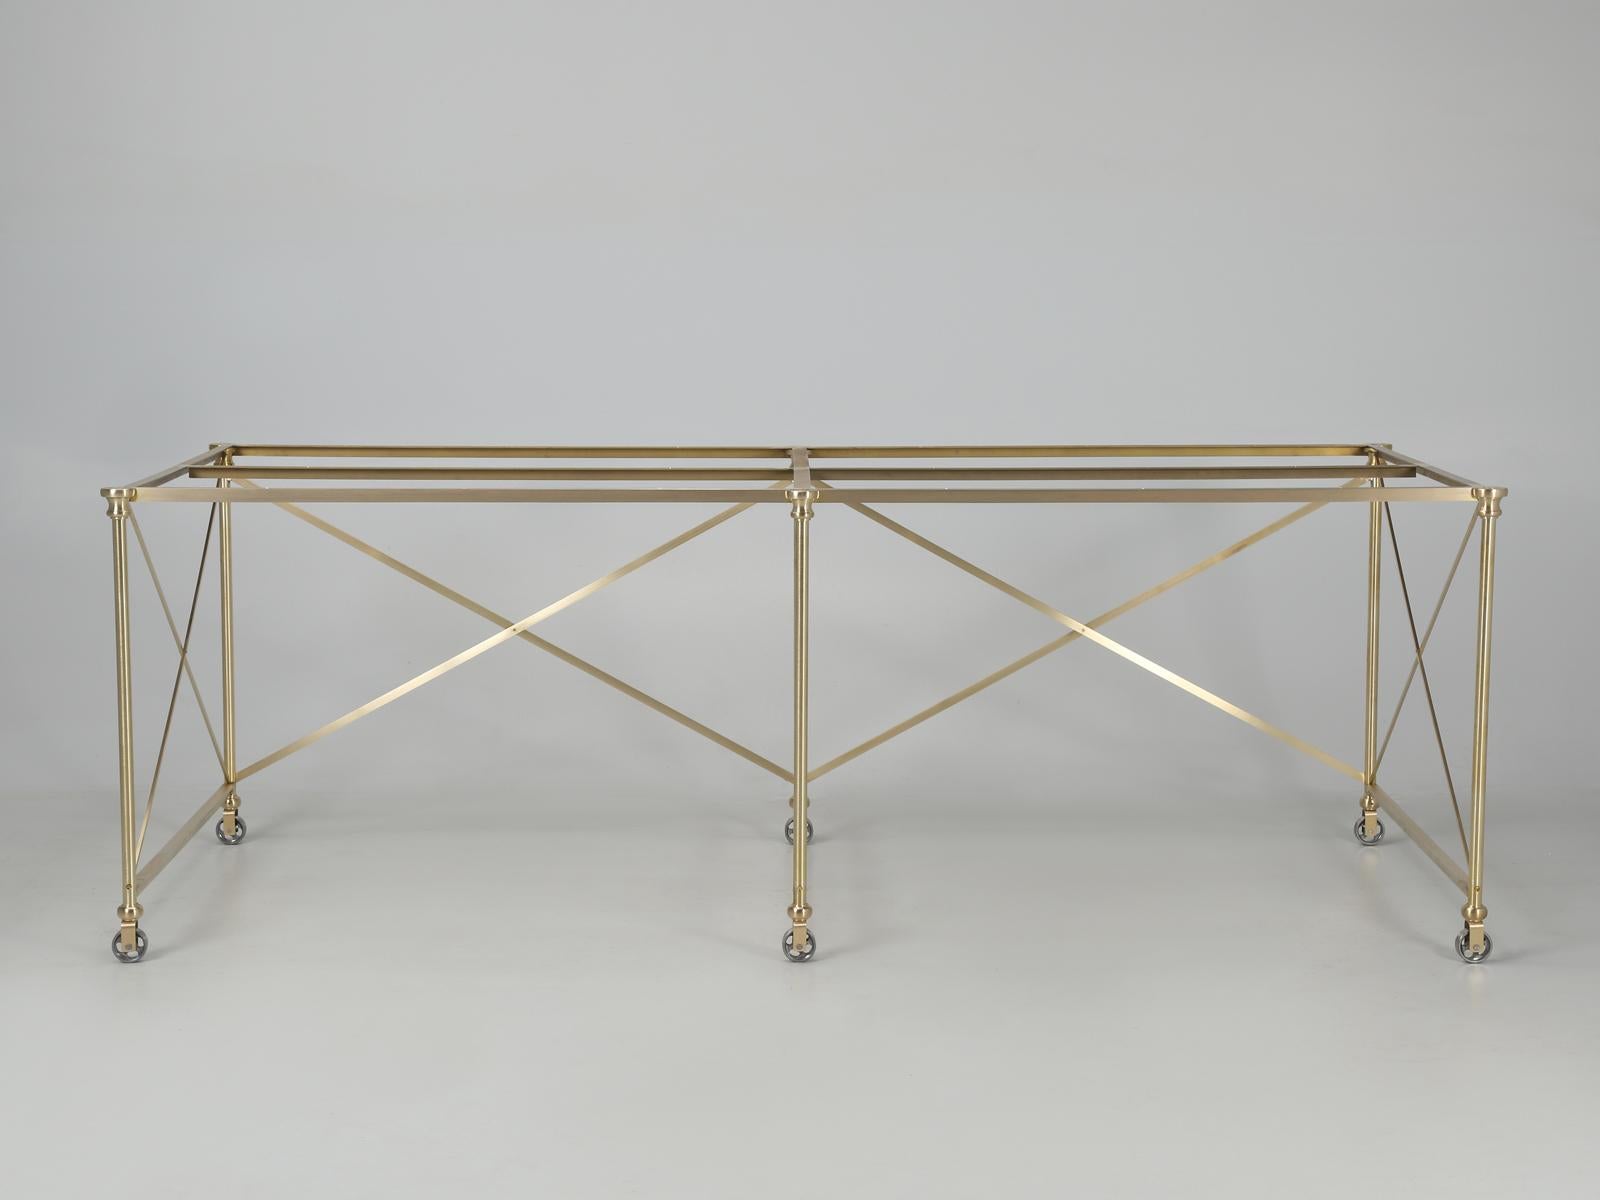 Our French inspired Industrial style kitchen island or possible dining table or even a console table, is custom fabricated here in Chicago from solid brass in virtually any dimension. Our brass kitchen island can also be crafted from stainless steel